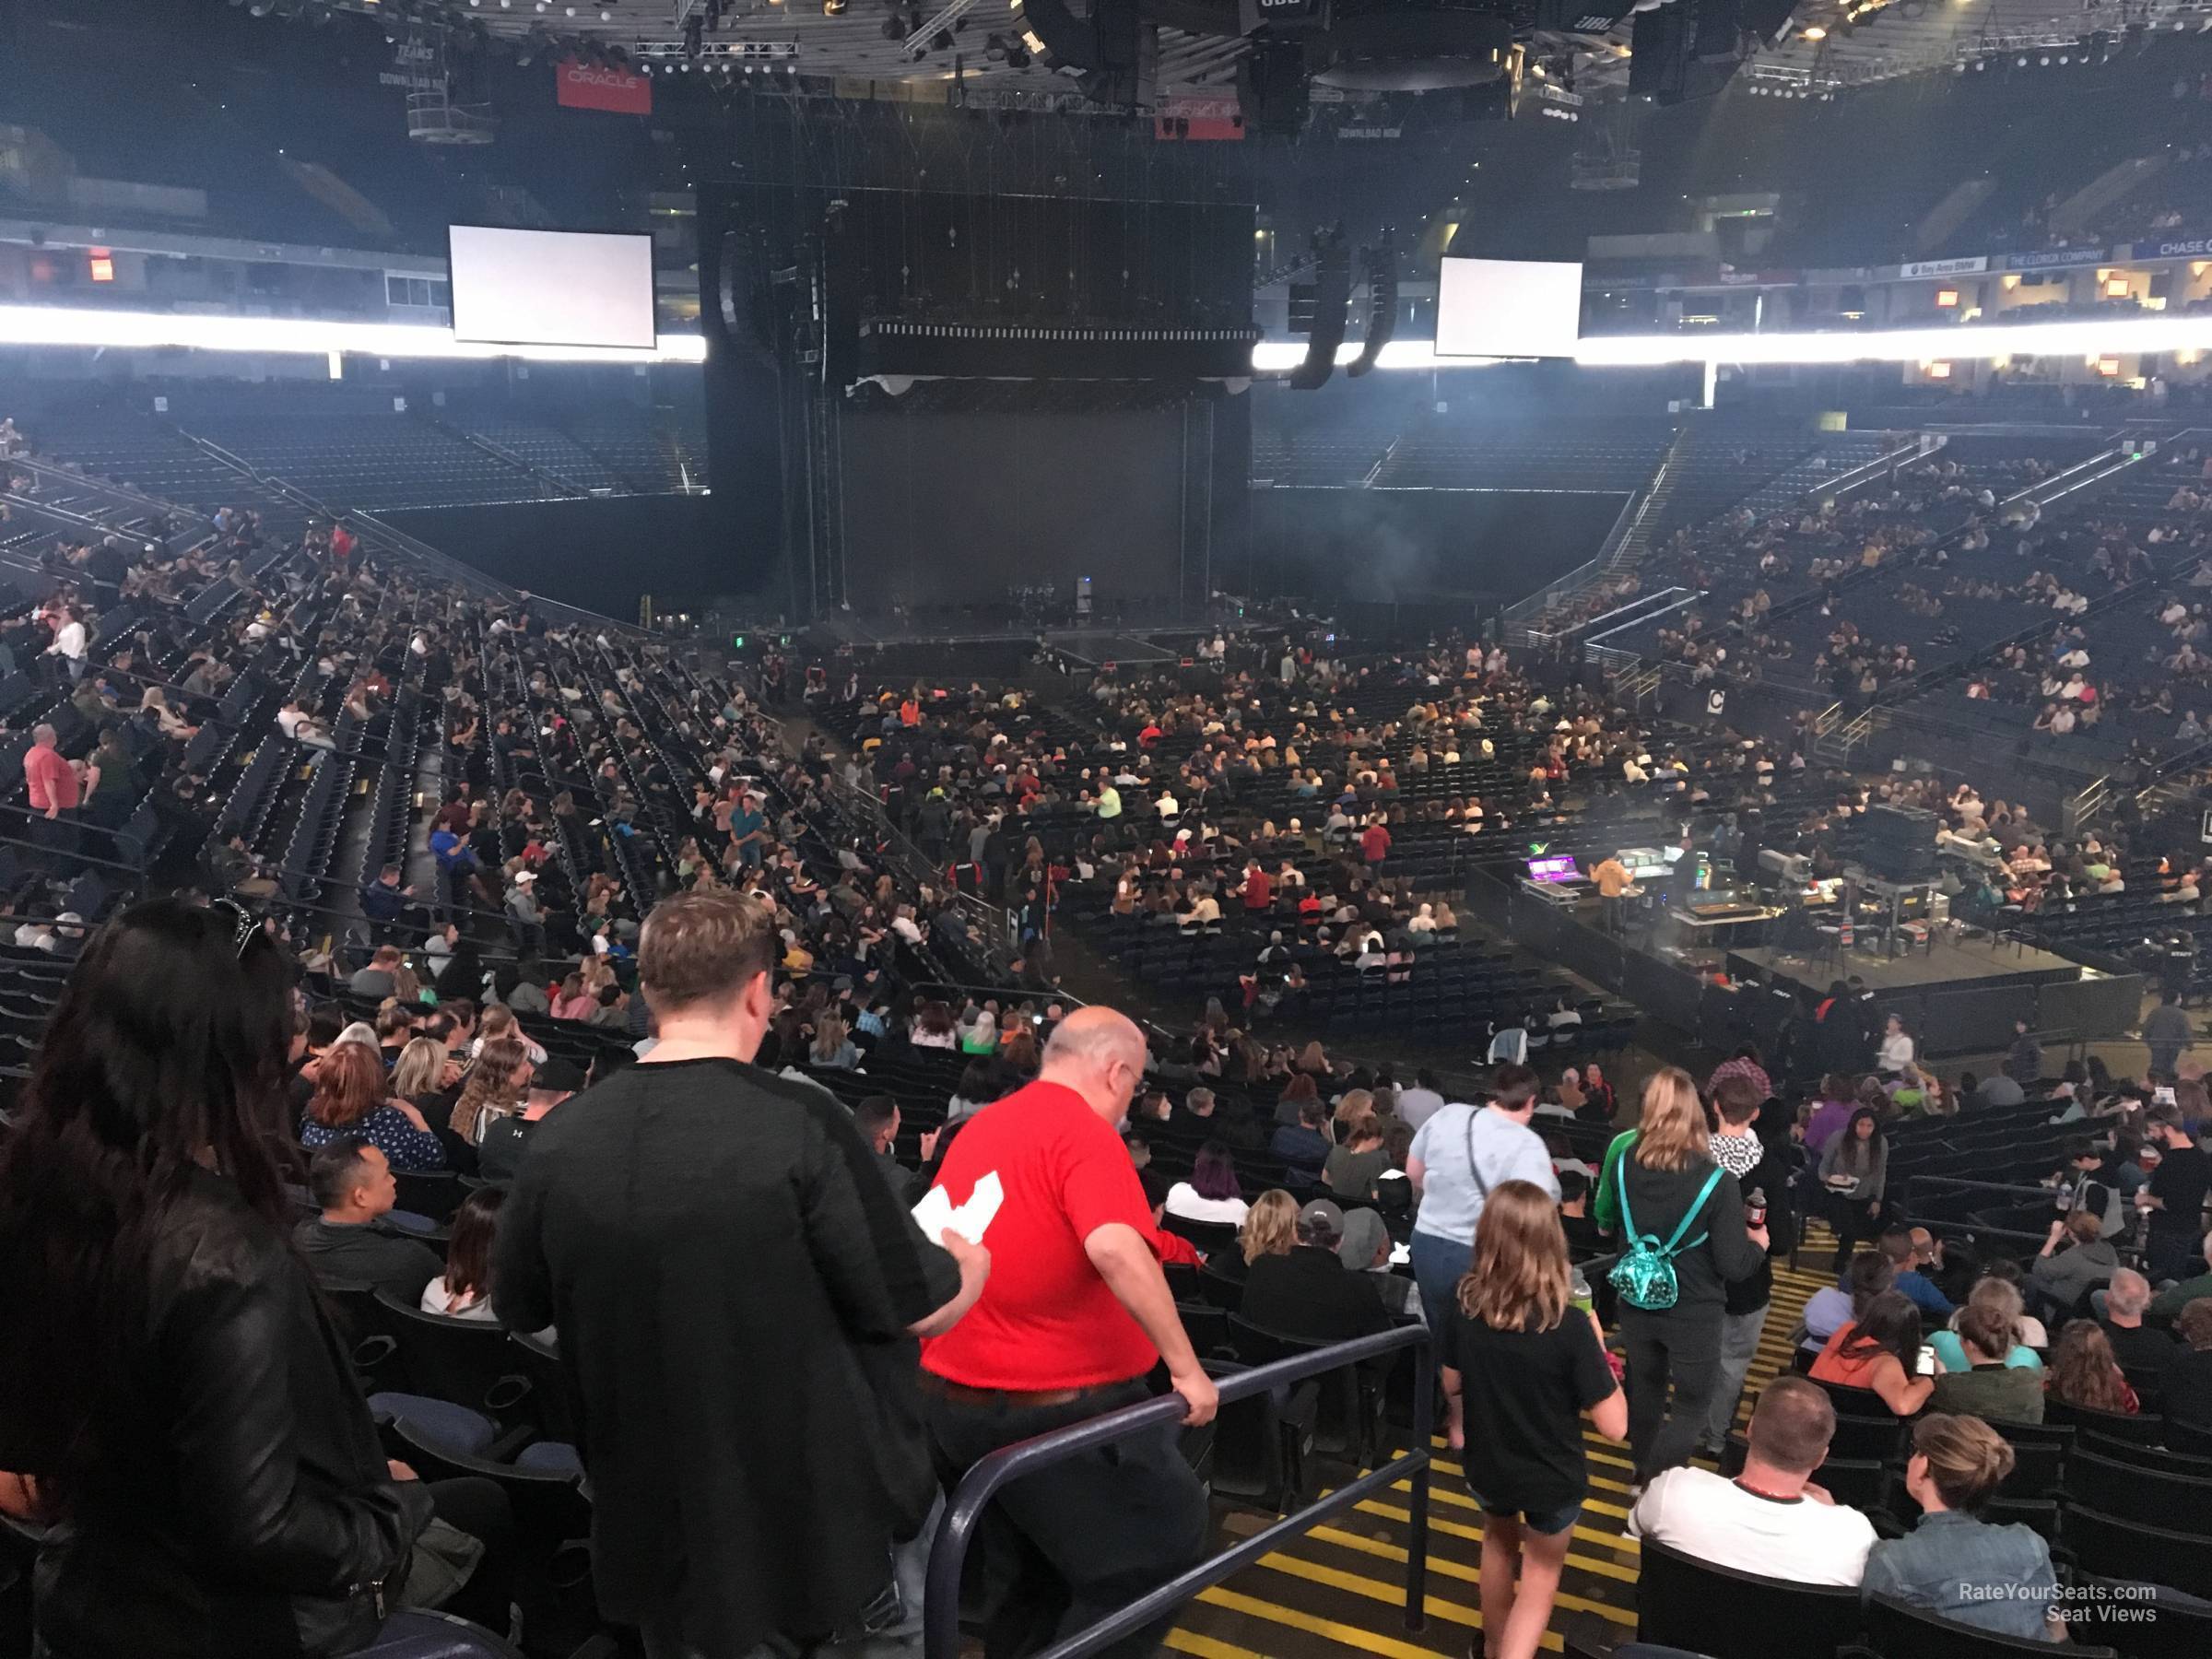 section 109, row 27 seat view  - oakland arena